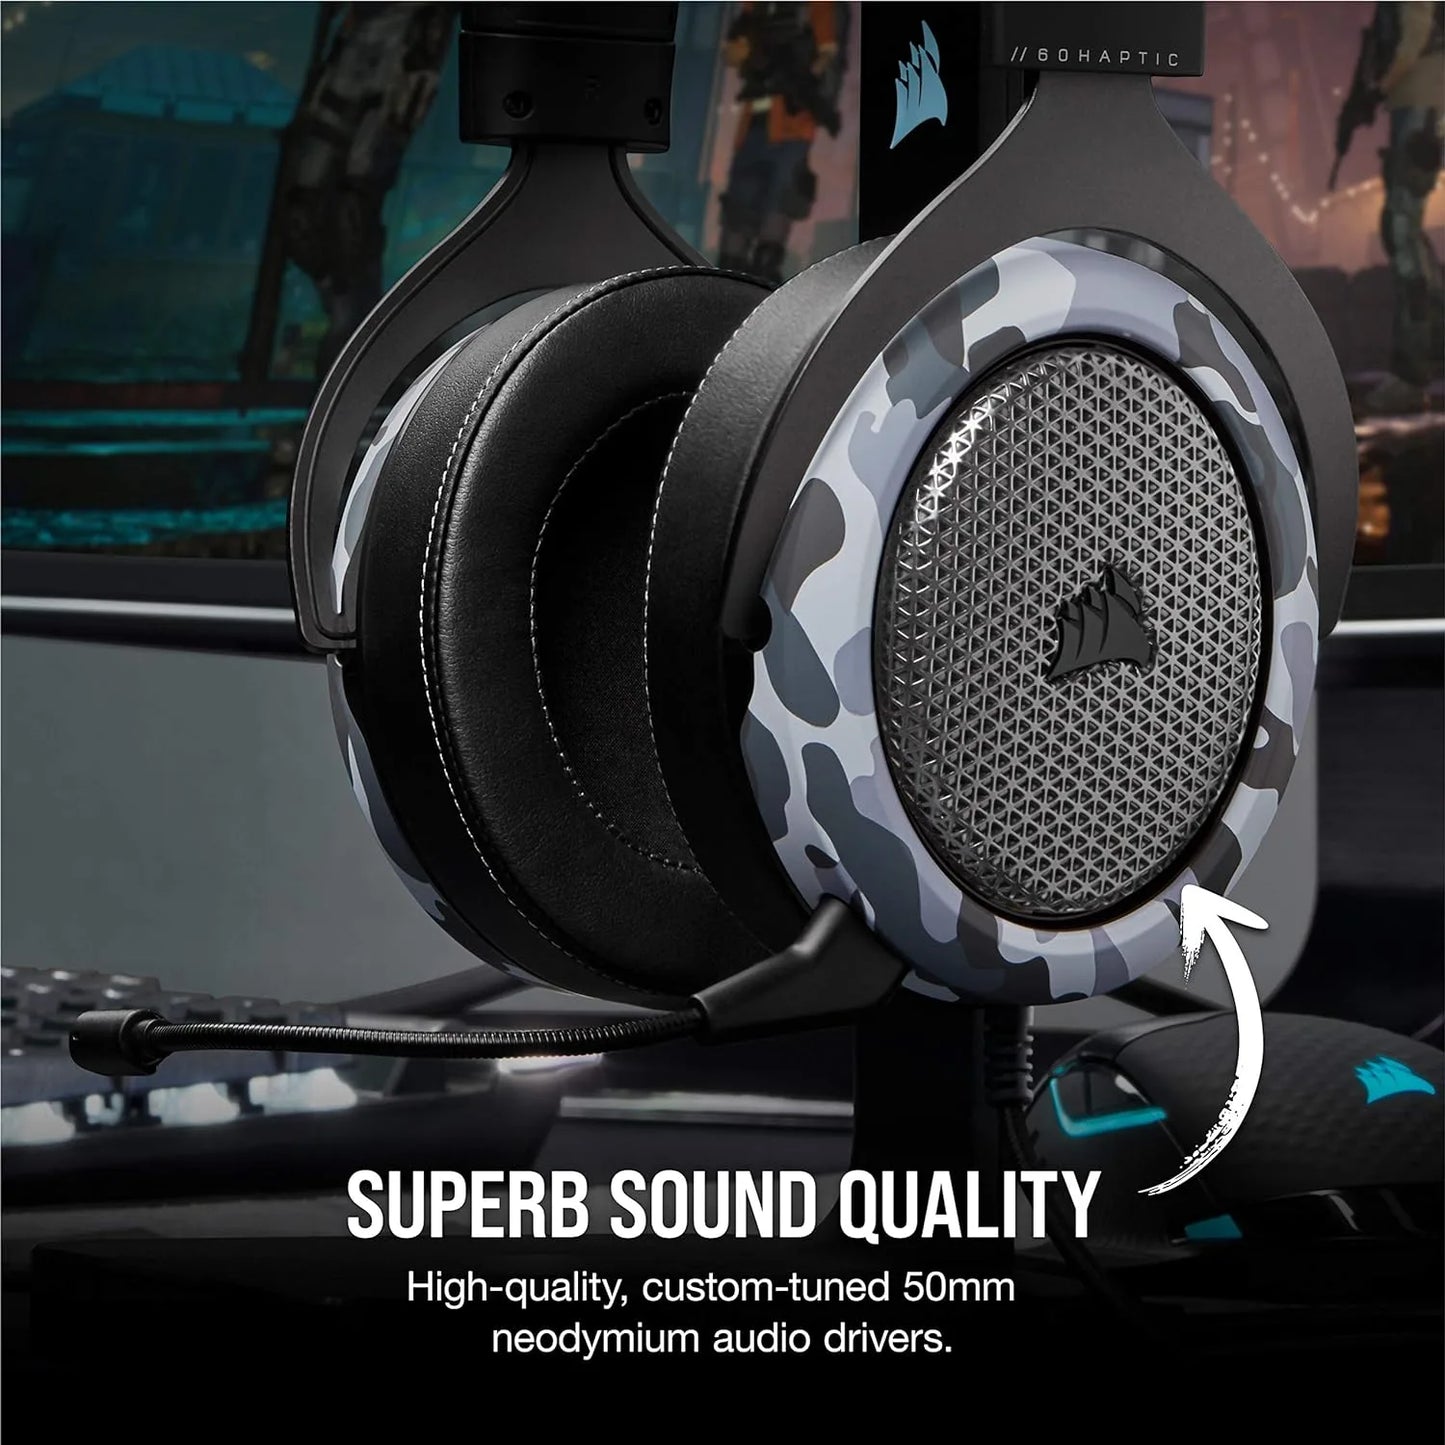 Corsair HS60 Haptic Stereo Gaming Headset with Haptic Bass, Memory Foam Earcups